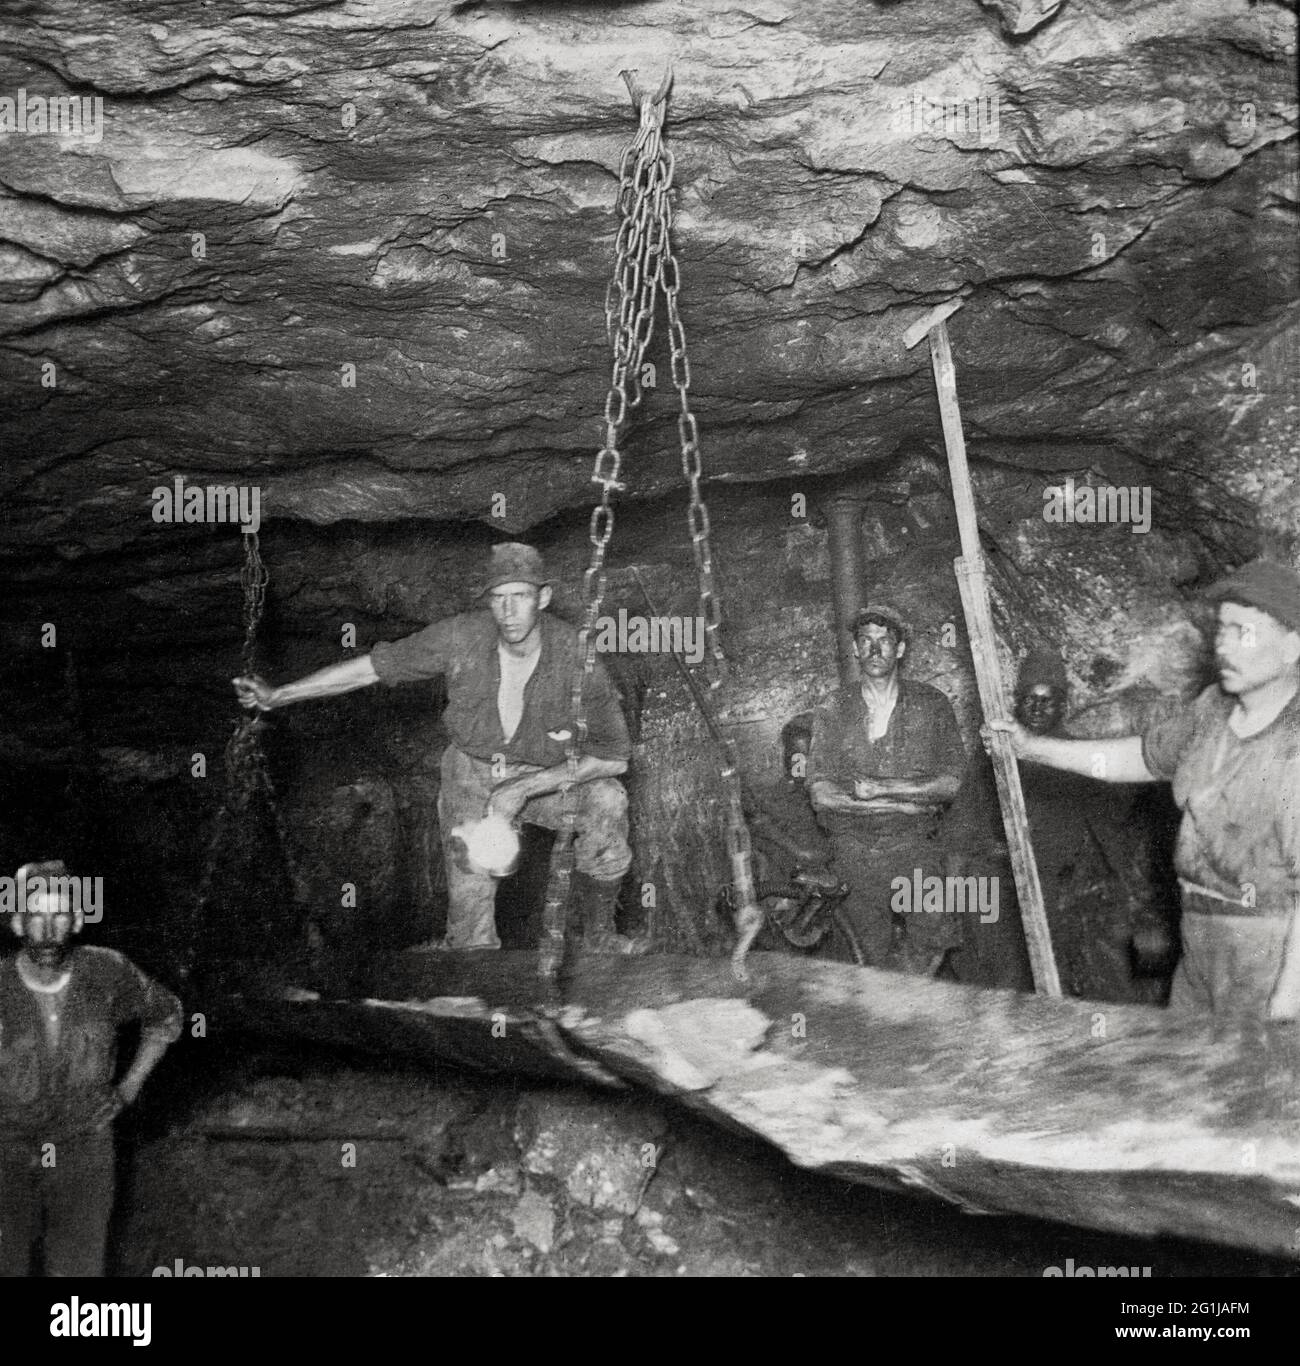 Miners with conveyor belt for ore in a stope, City & Suburban Gold Mine, Johannesburg, South Africa Stock Photo